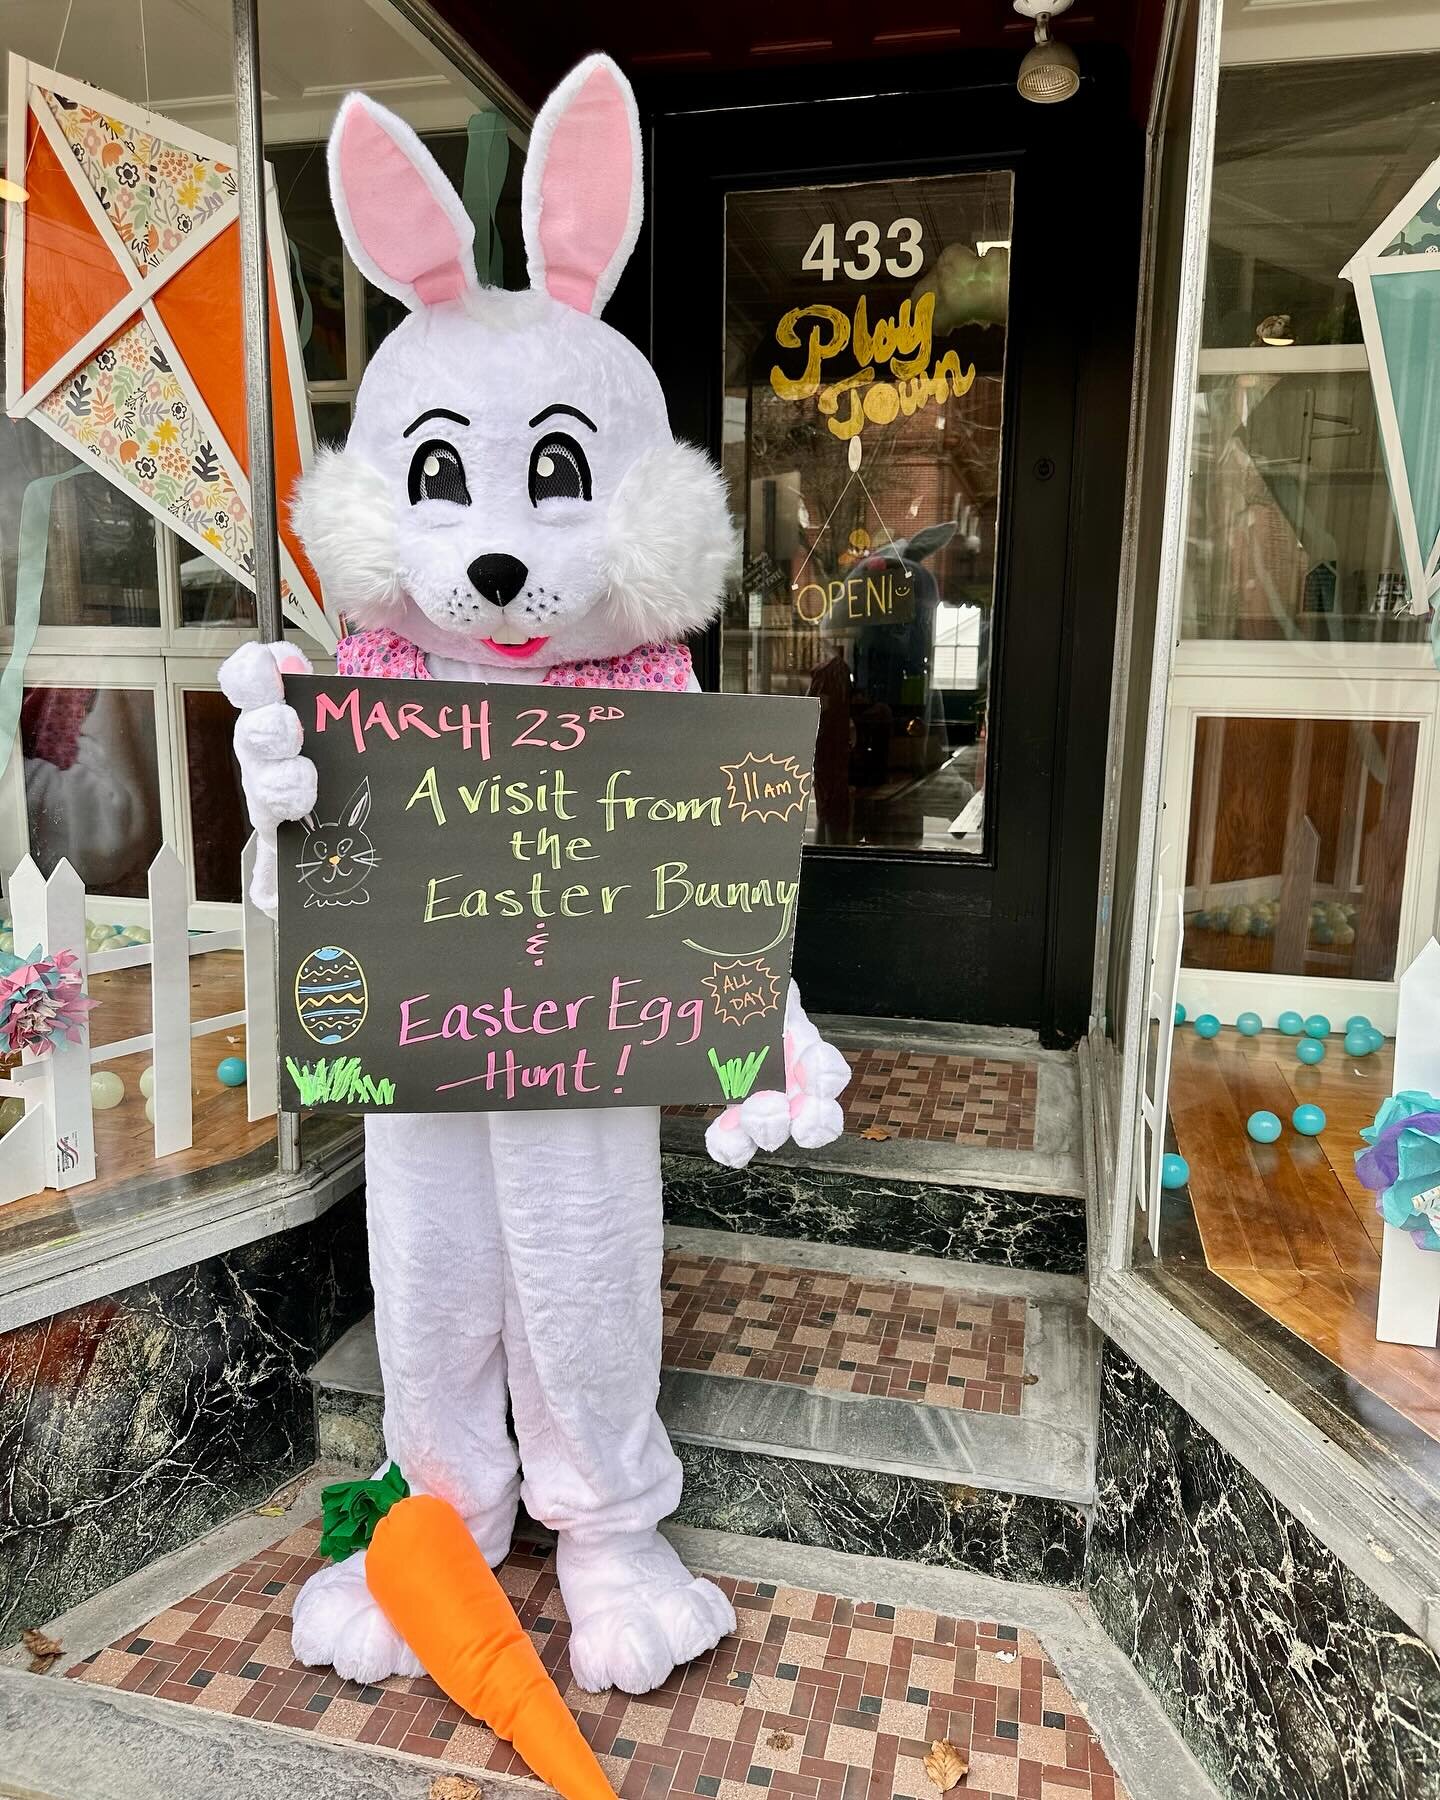 😲Guess who&rsquo;s coming to Play Town? This Sunday we will have a very special guest, and you are invited! For the normal price of admission, come take a photo with the Easter Bunny (at 11am), and maybe find a few eggs too (Easter egg hunting happe